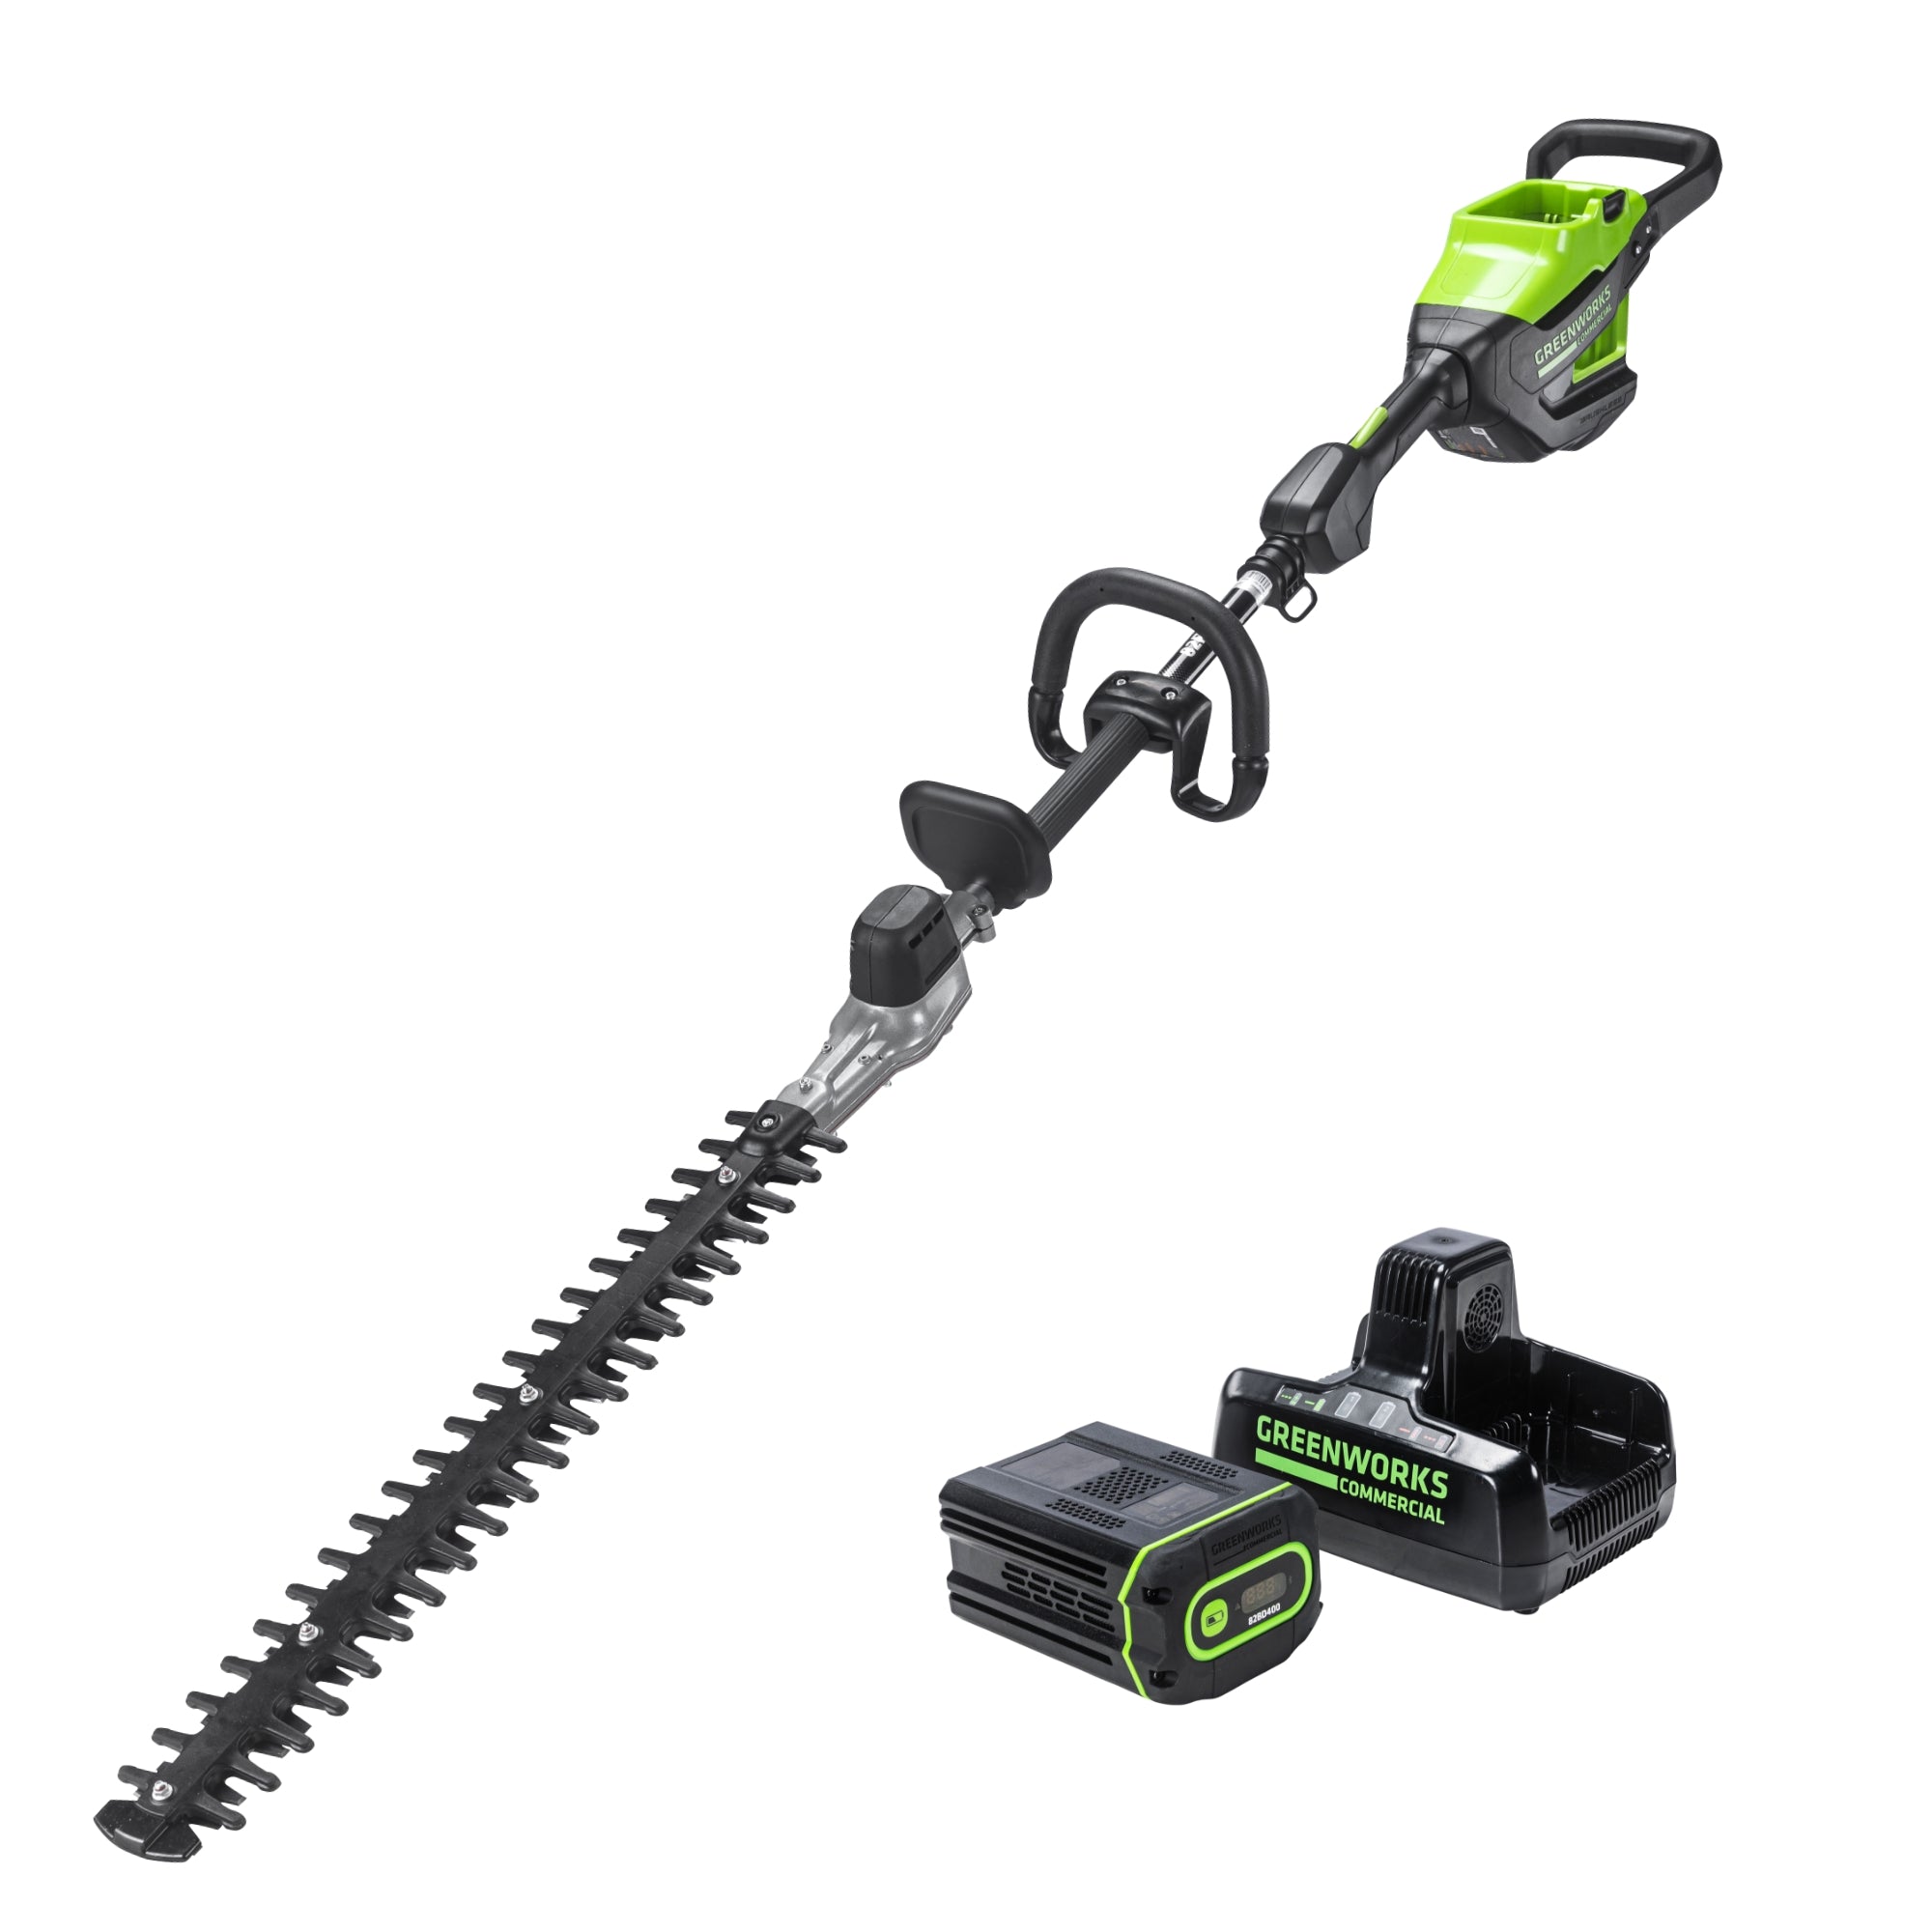 82V Short Pole Hedge Trimmer with 2.5 Ah Battery and Dual Port